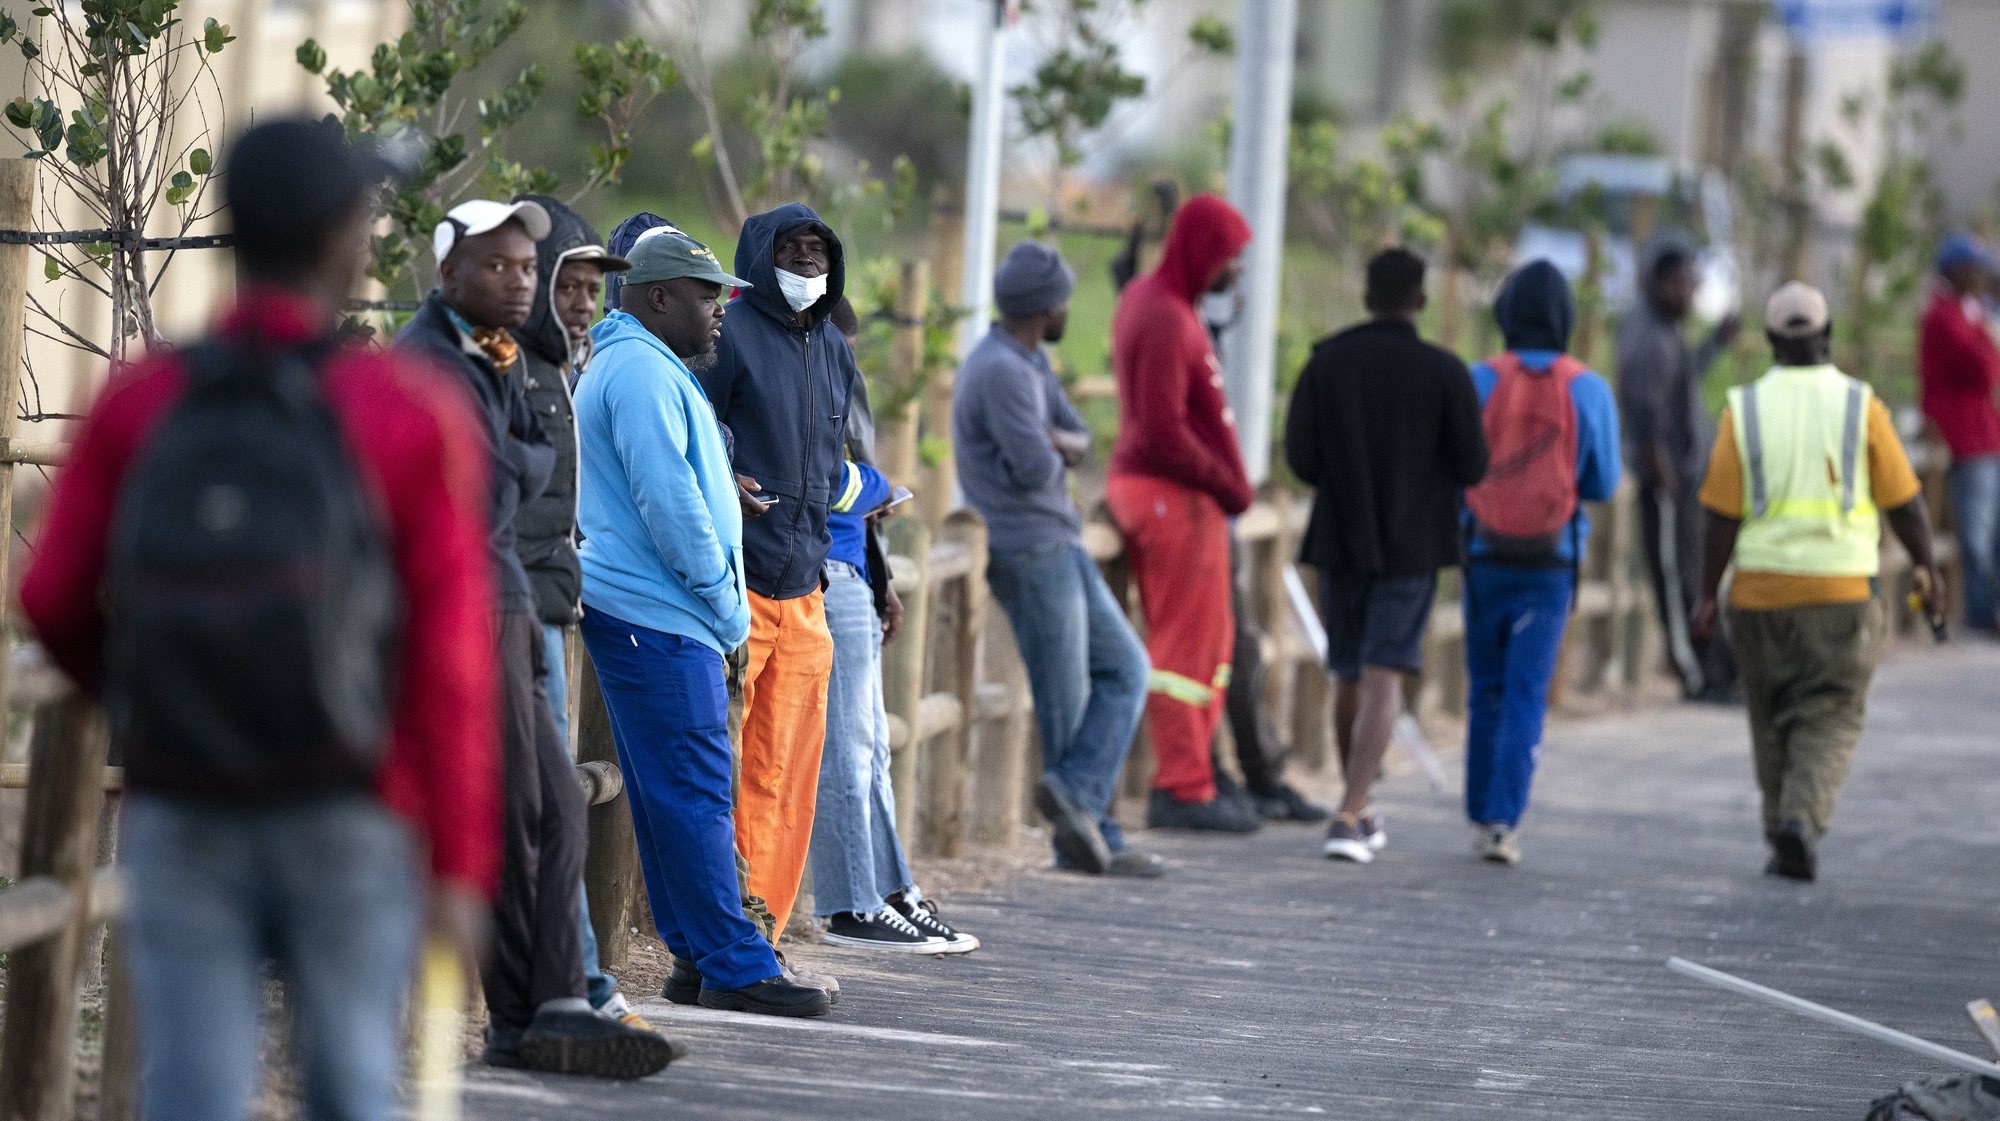 epa08508009 Men wait for work in the informal sector with around 200 other job seekers at a road junction in Cape Town, South Africa, 24 June 2020 (issued 25 June 2020). According to a report released this week by Statistics South Africa the unemployment rate has reached a record high level of 30.1 percent up from 29.1 percent in the final quarter of last year. Africa&#039;s biggest economy was in recession before the coronavirus pandemic but lockdowns have further negatively impacted businesses and employment opportunities. The informal sector provides employment to approximately 30 percent of South African workers according to the World Bank. Cape Town is the countries epicenter of coronavirus SARS-CoV-2 which causes the Covid-19 disease.  EPA/NIC BOTHMA ATTENTION: This Image is part of a PHOTO SET